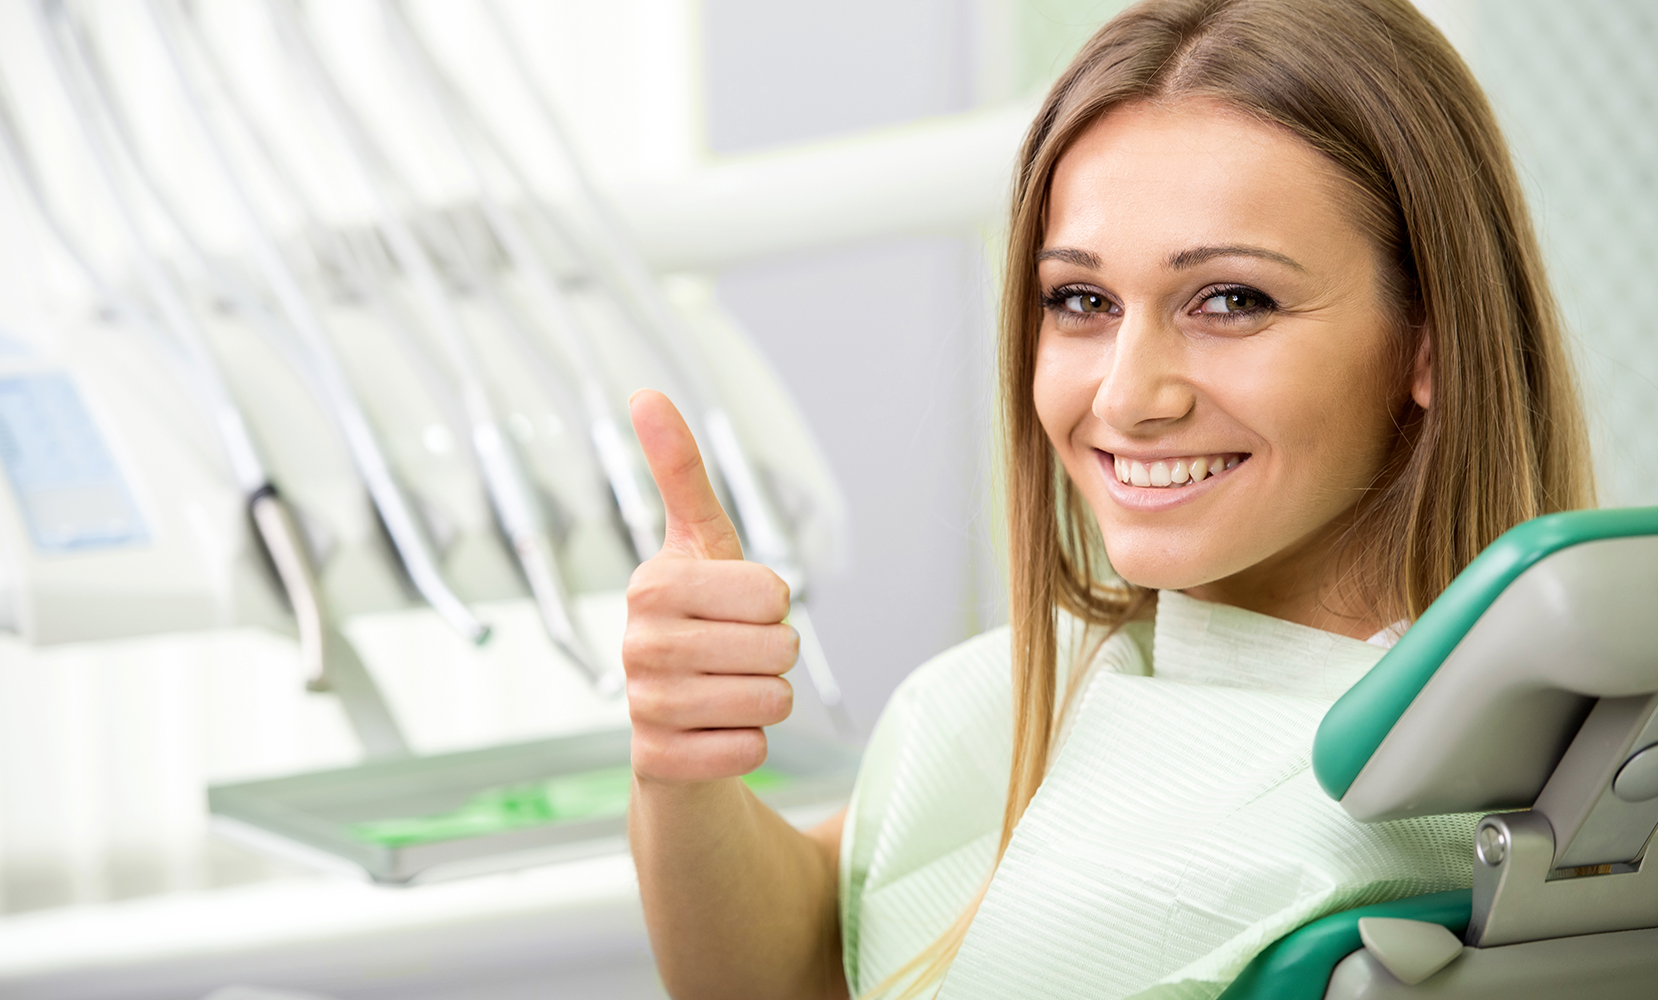 Young lady in dental chair with thumbs up